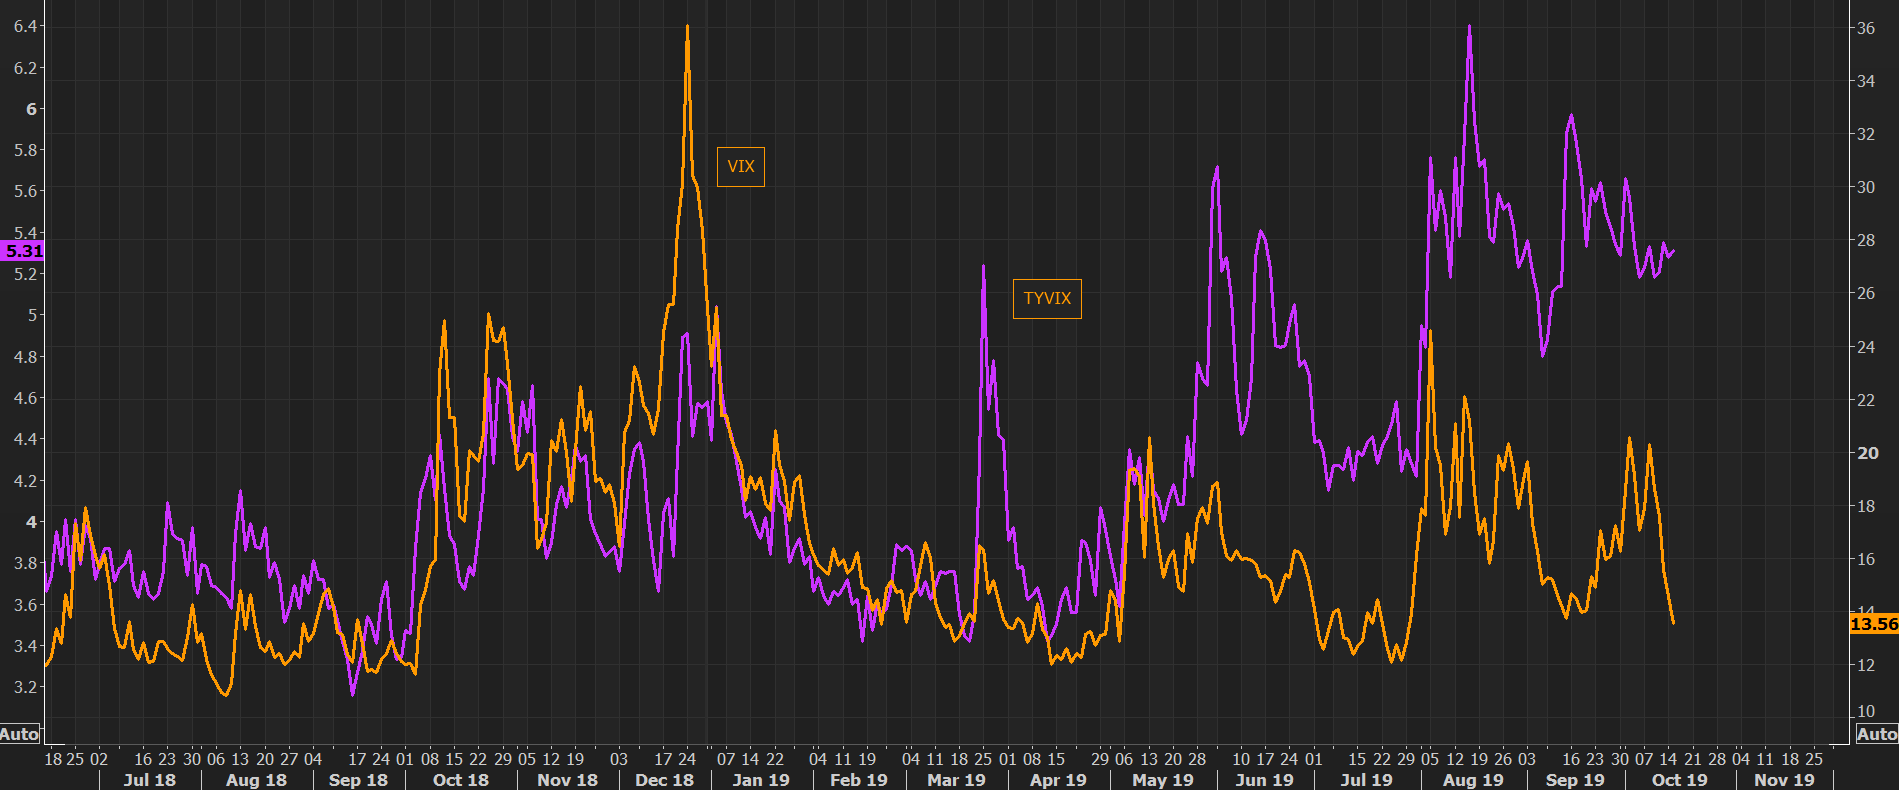 Treasury and equity volatility live in different worlds